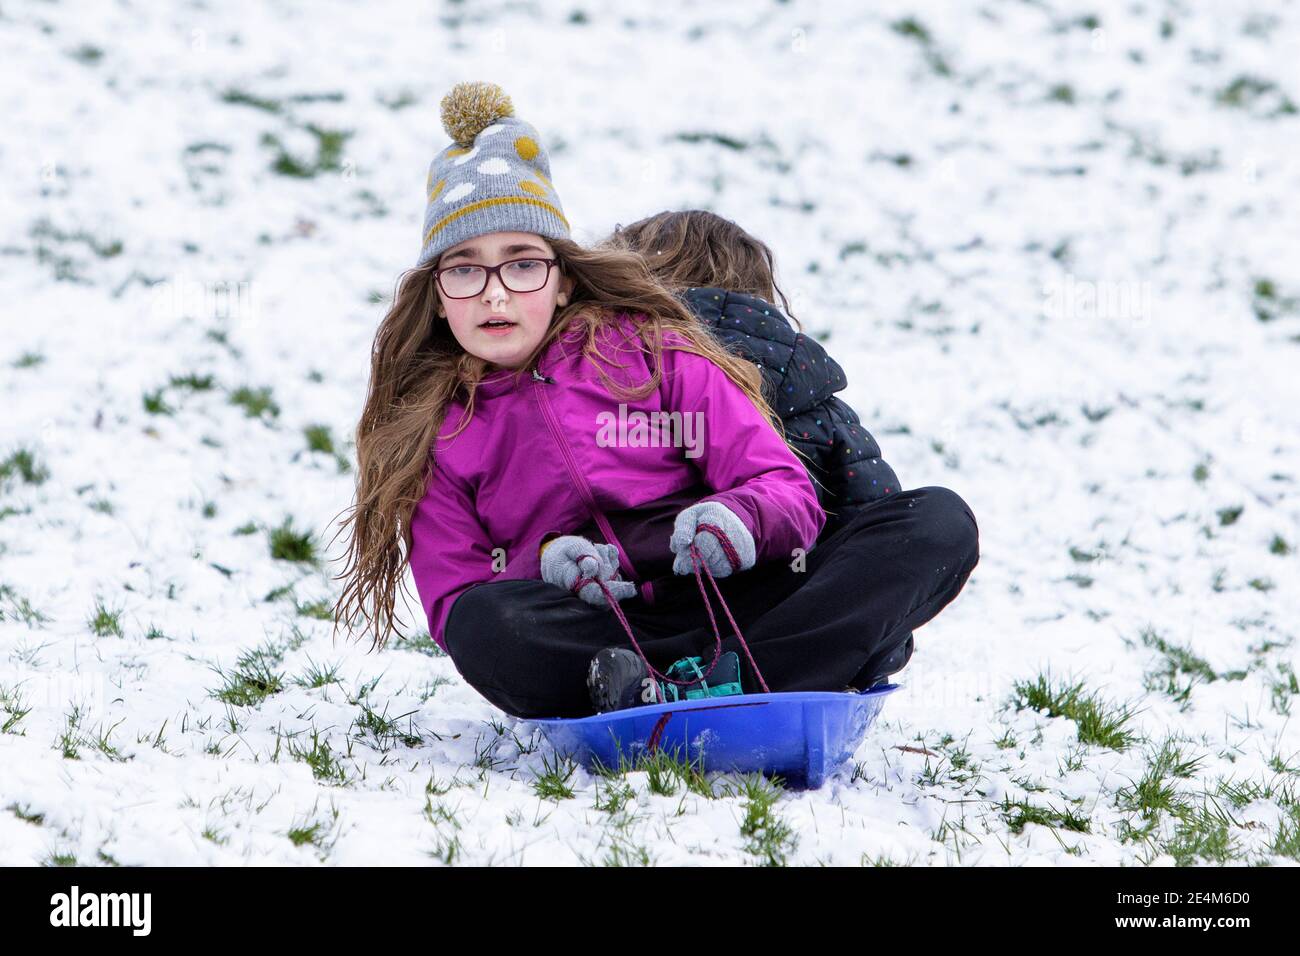 Chippenham, Wiltshire, UK. 24th January, 2021. As Chippenham residents wake up to their first snow of the year,two children are pictured in a local park in Chippenham as they slide down a hill on a sledge. Credit: Lynchpics/Alamy Live News Stock Photo